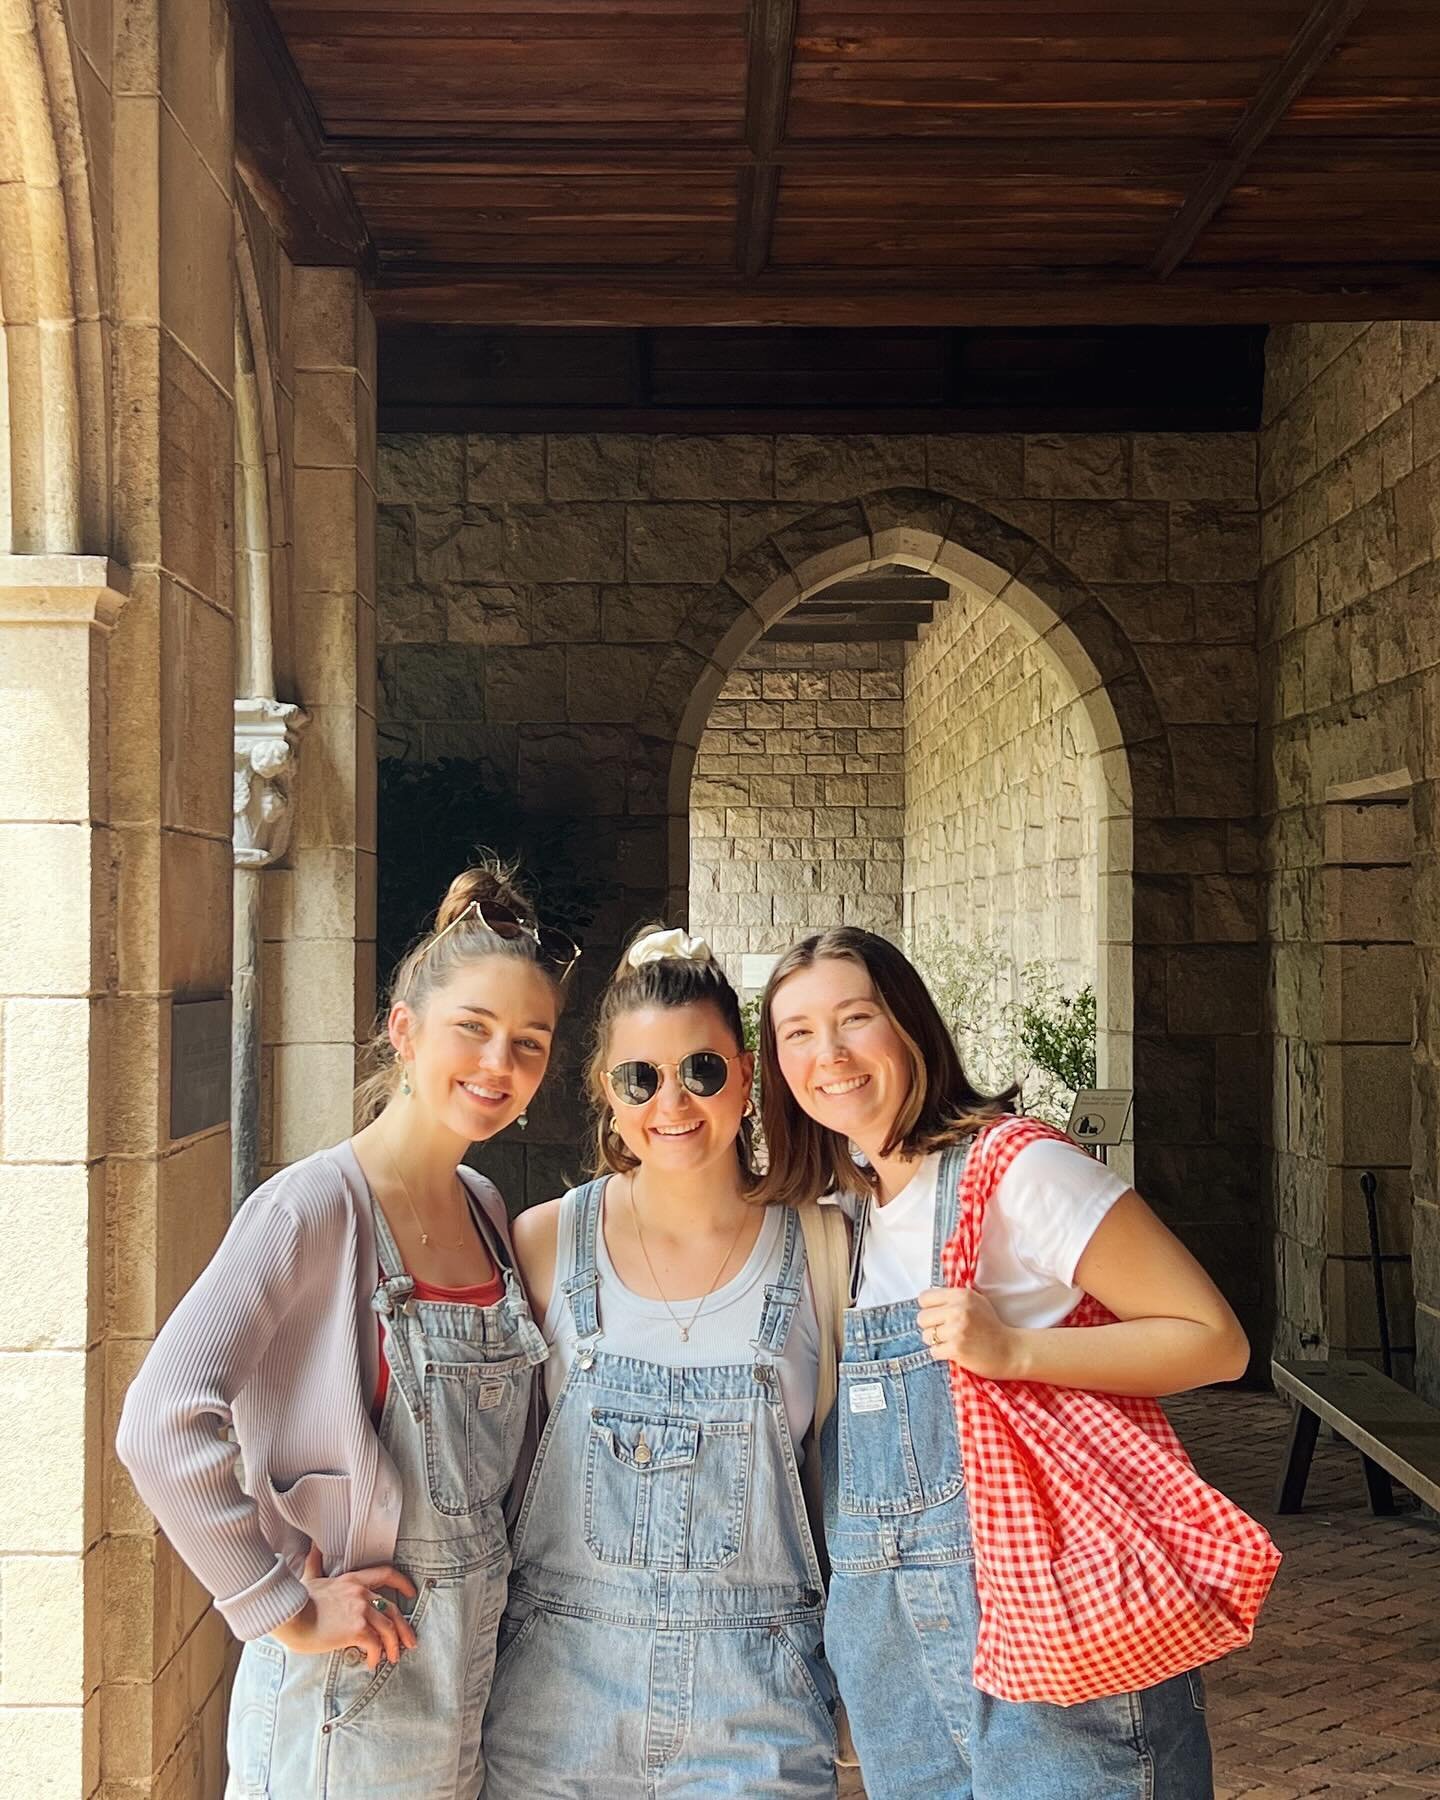 In addition to our weekly meetings, our team meets yearly and quarterly to cast vision for Rise Collective and create space to listen for God&rsquo;s direction and guidance. 

We spent yesterday morning at The Met Cloisters, meditating on Luke 5 amid